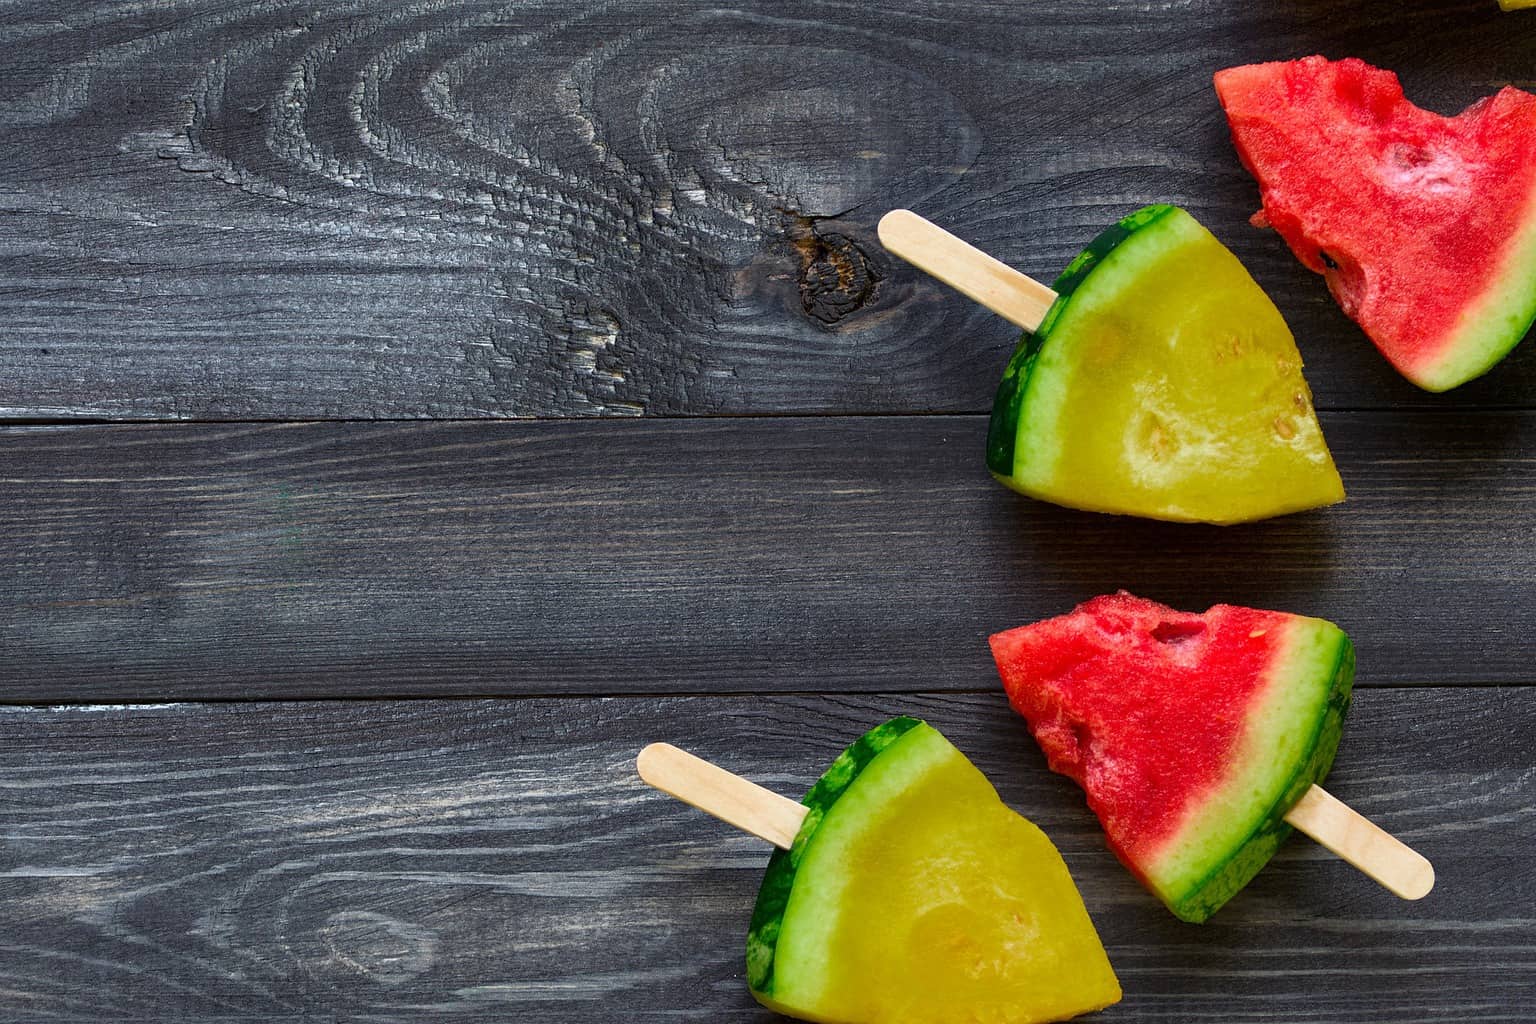 Is It Good to Add Watermelons to Your Diet?